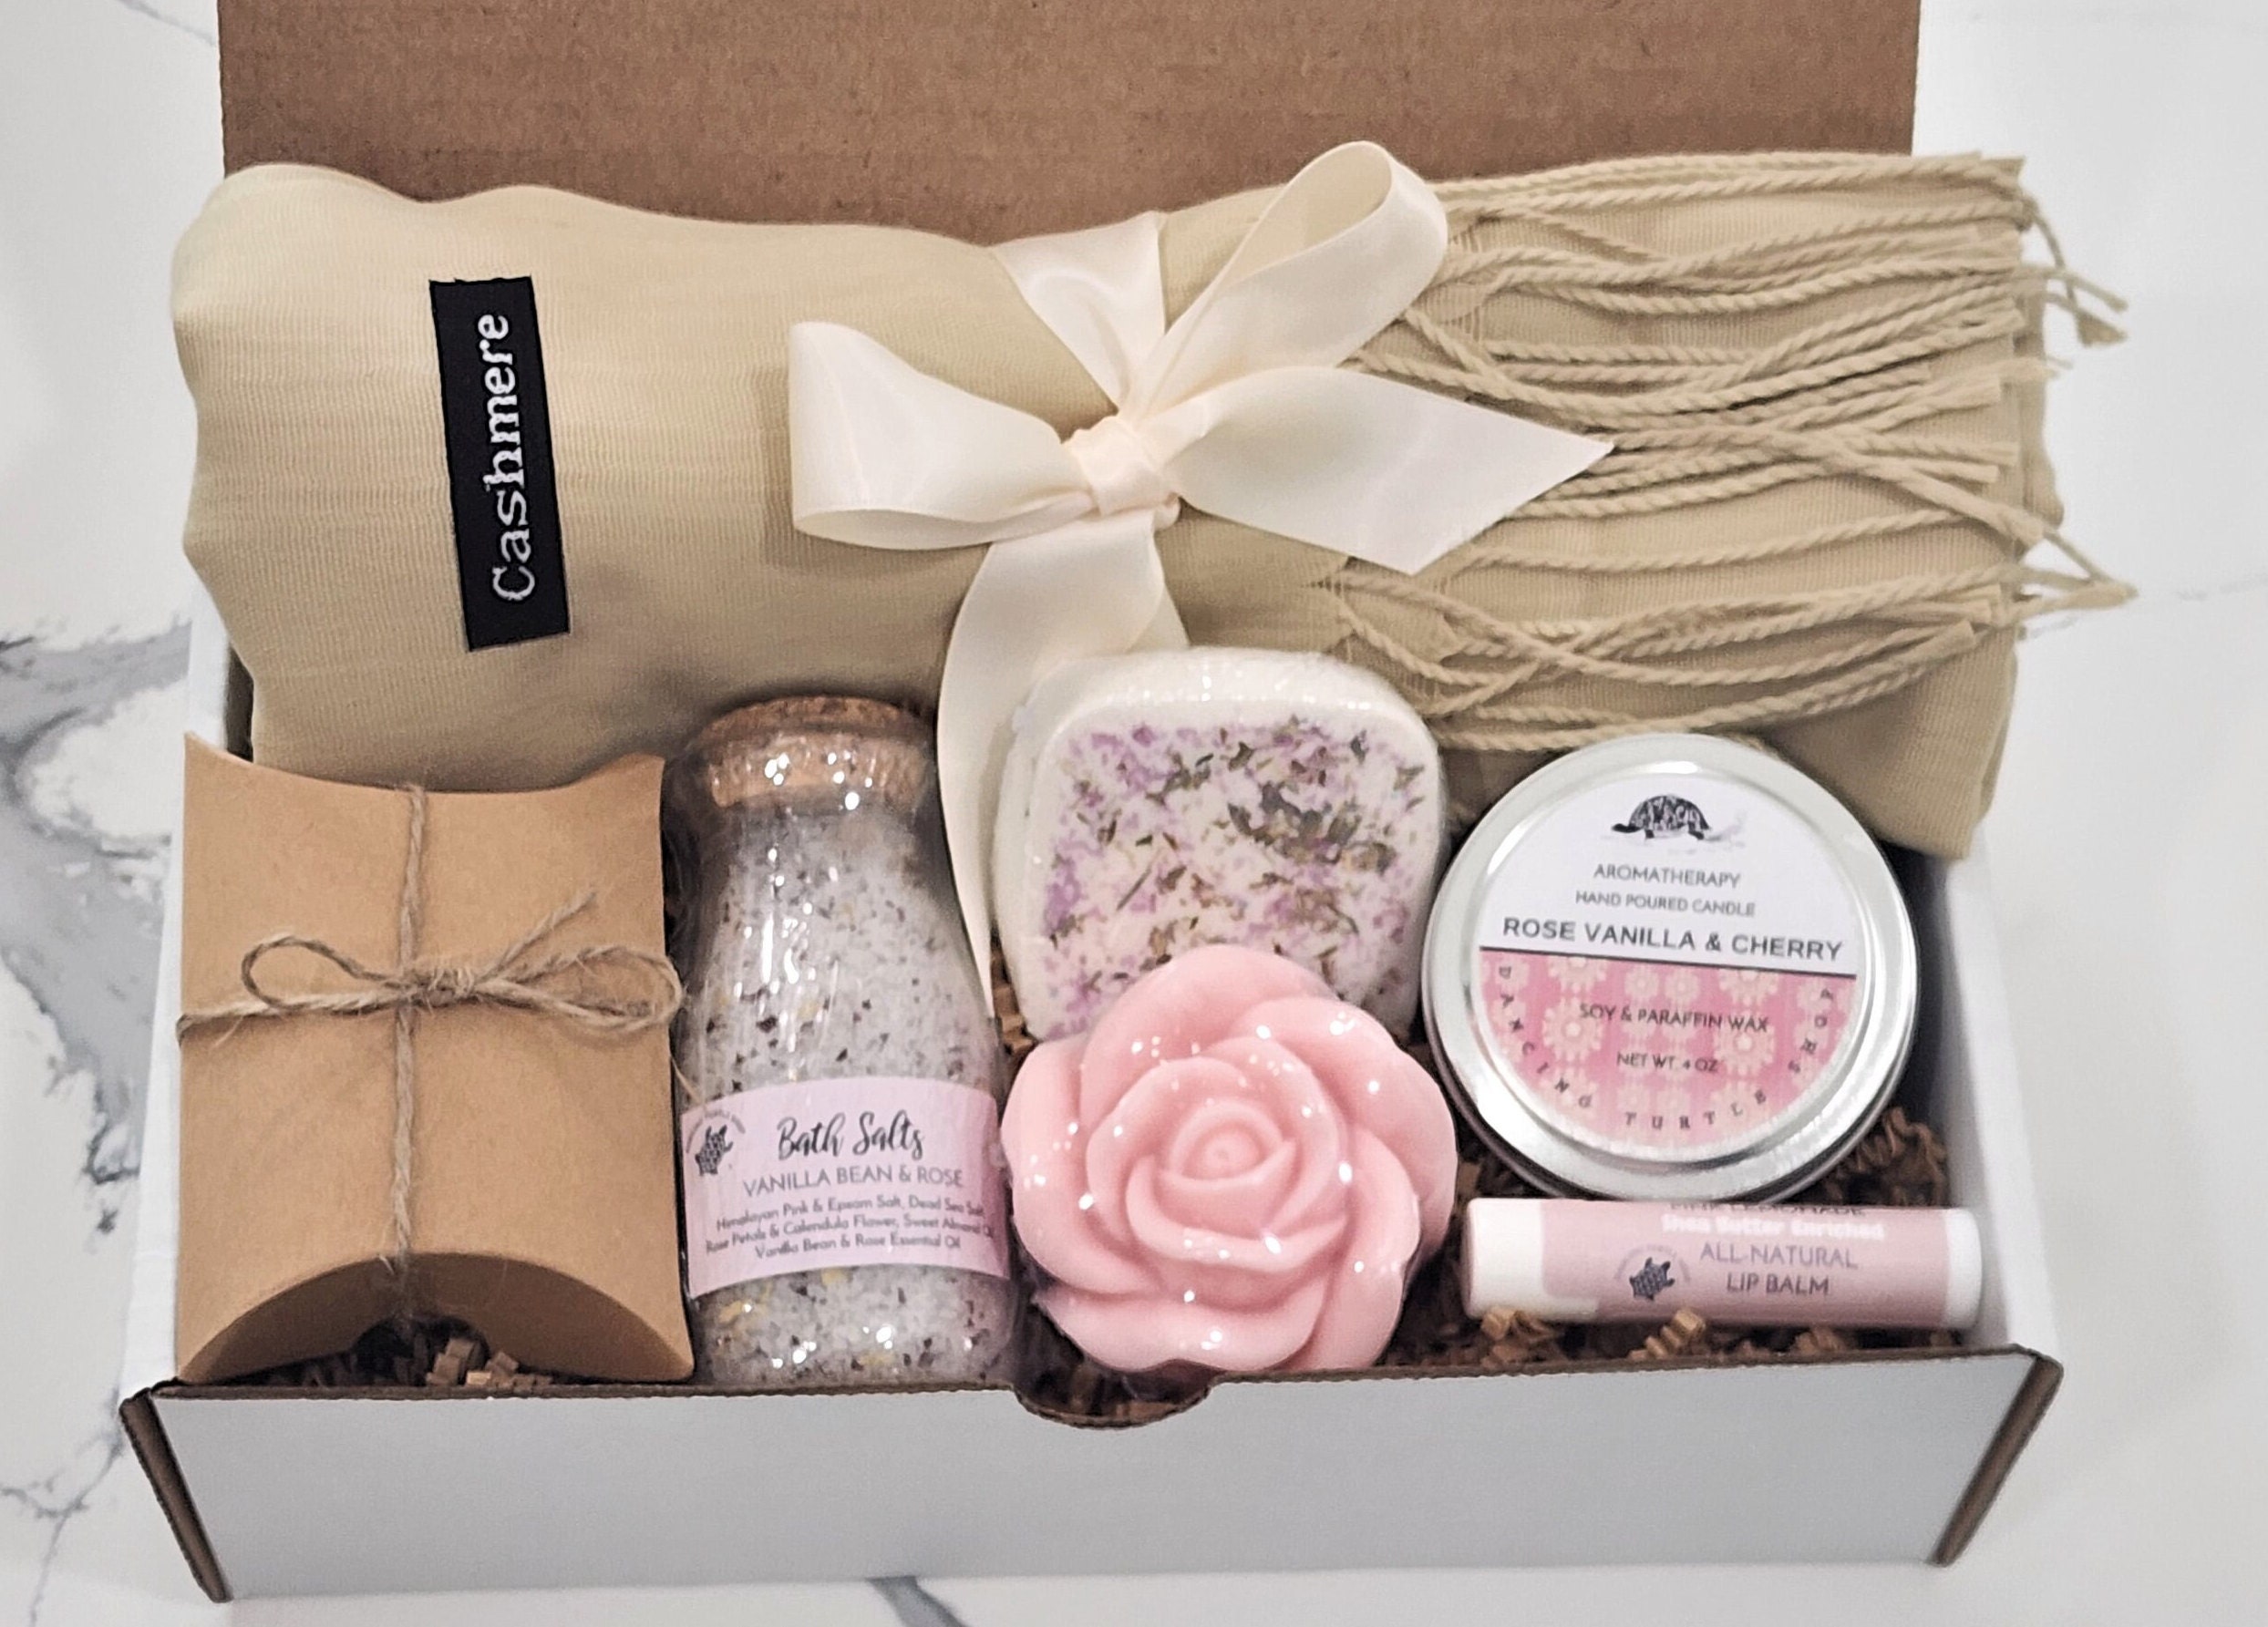 Birthday Gift for Her, Happy Birthday Box, Birthday Gifts, Succulent Gift  Box, Birthday Care Package for Her, Spa Gift, Soy Candle Gift 